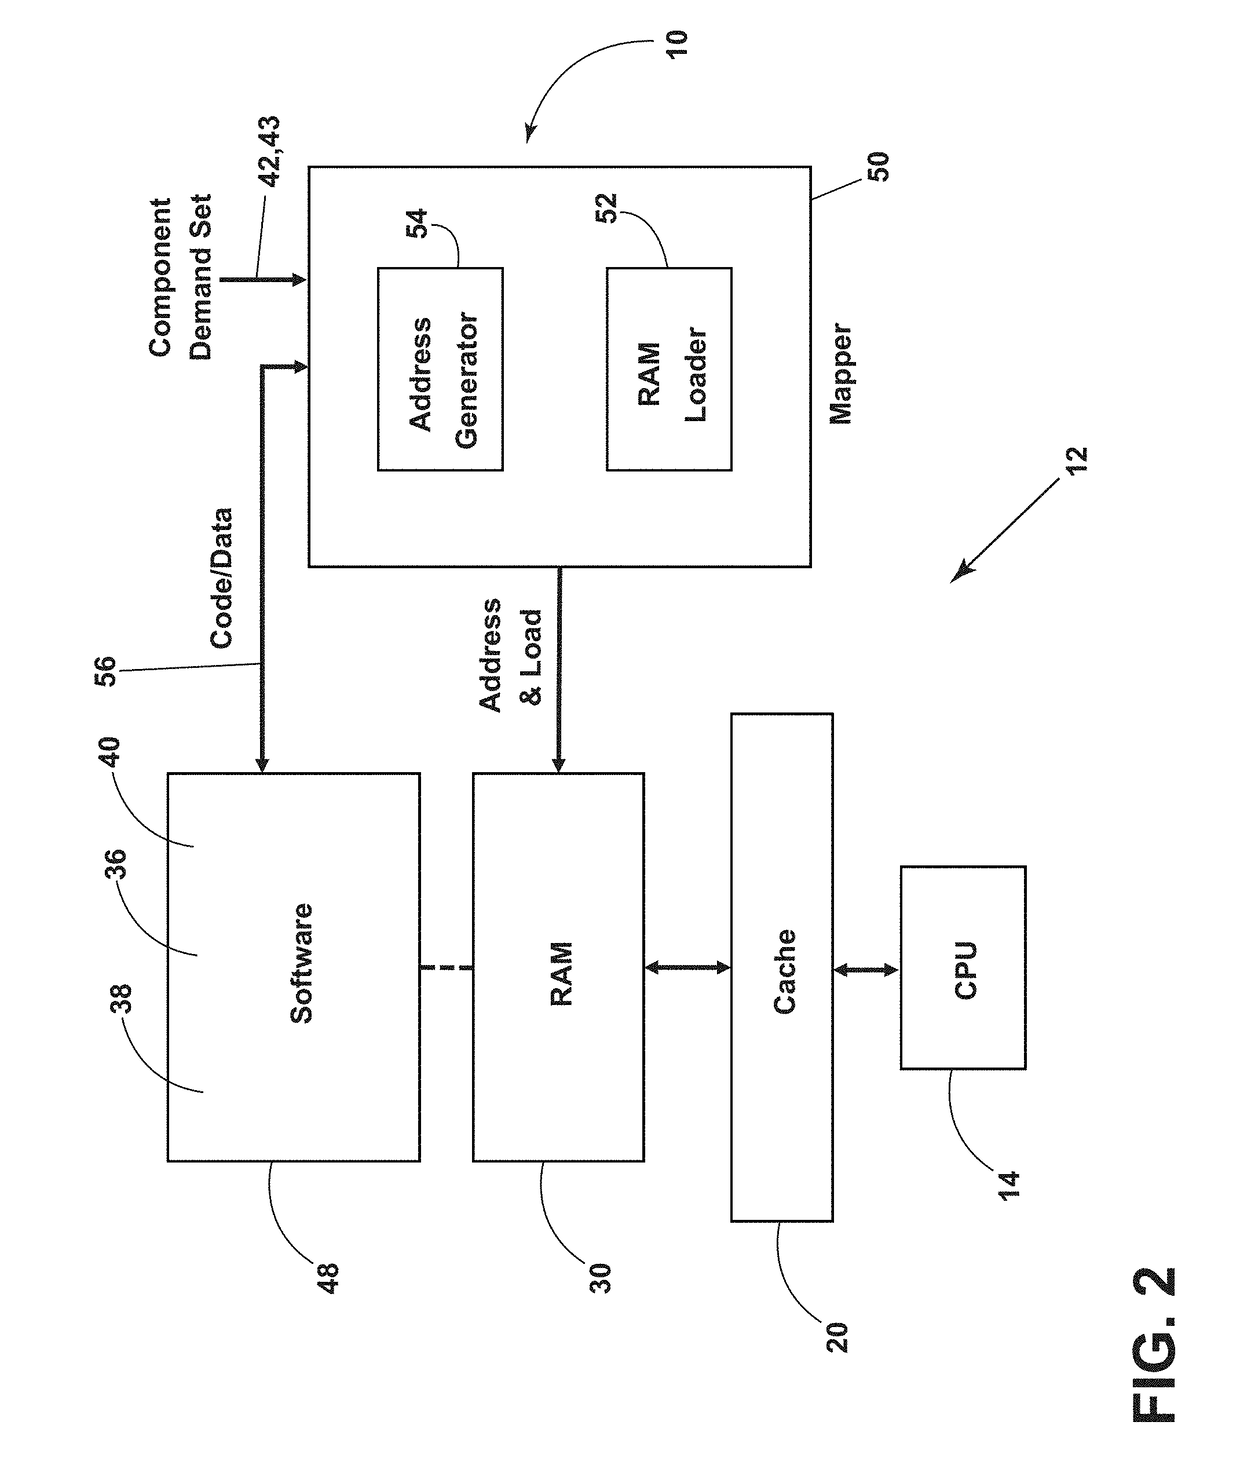 Method of partitioning a set-associative cache in a computing platform